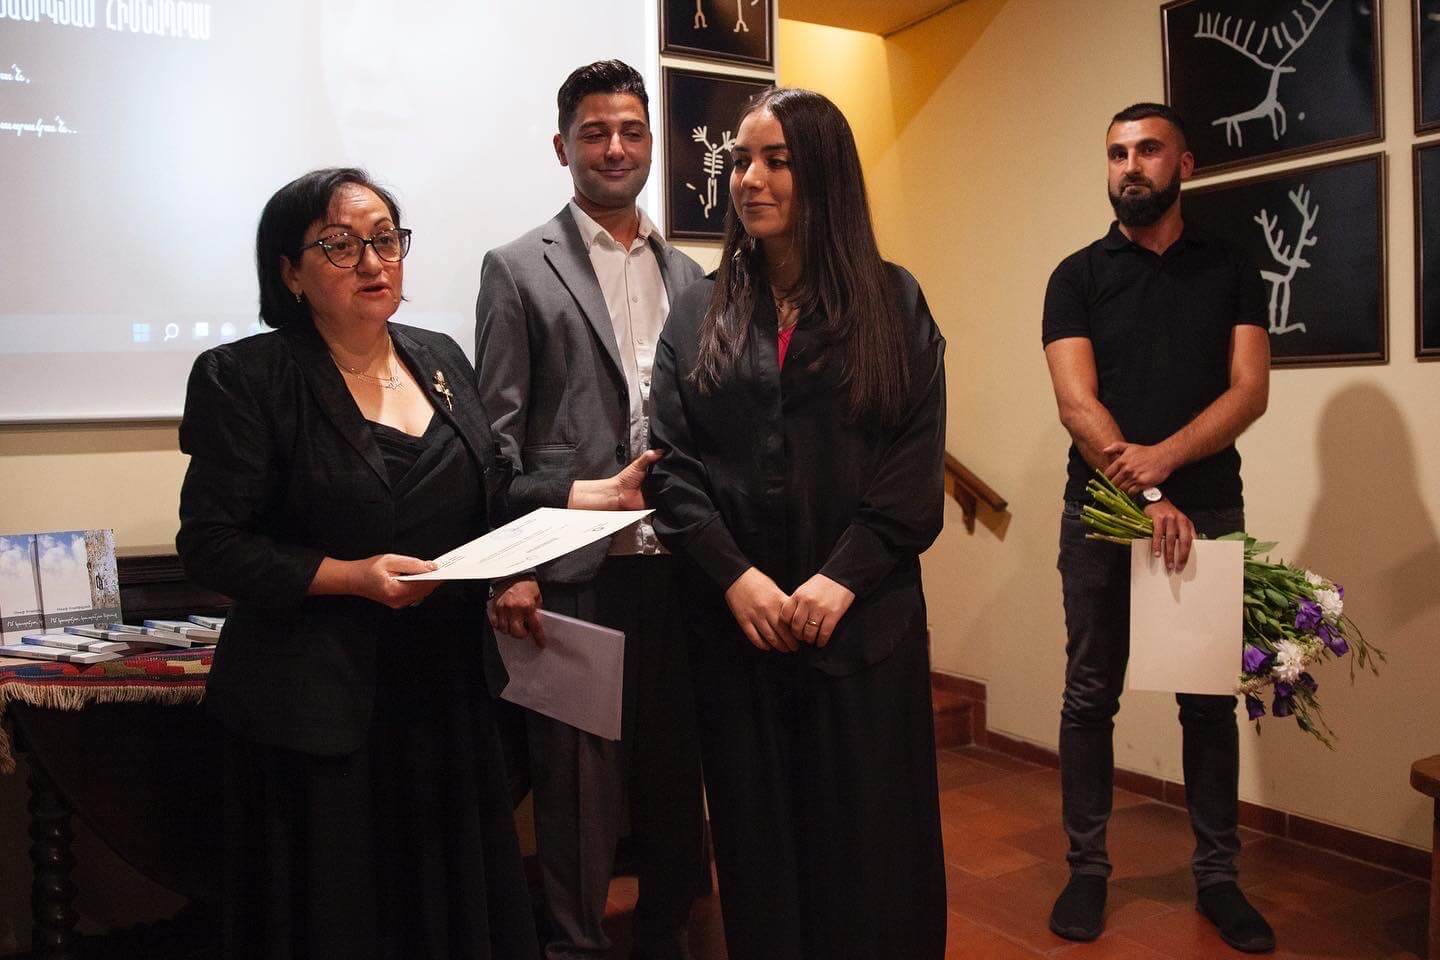 The winners are here: The results of the essay competition dedicated to the life and works of William Saroyan are official (video, photos).